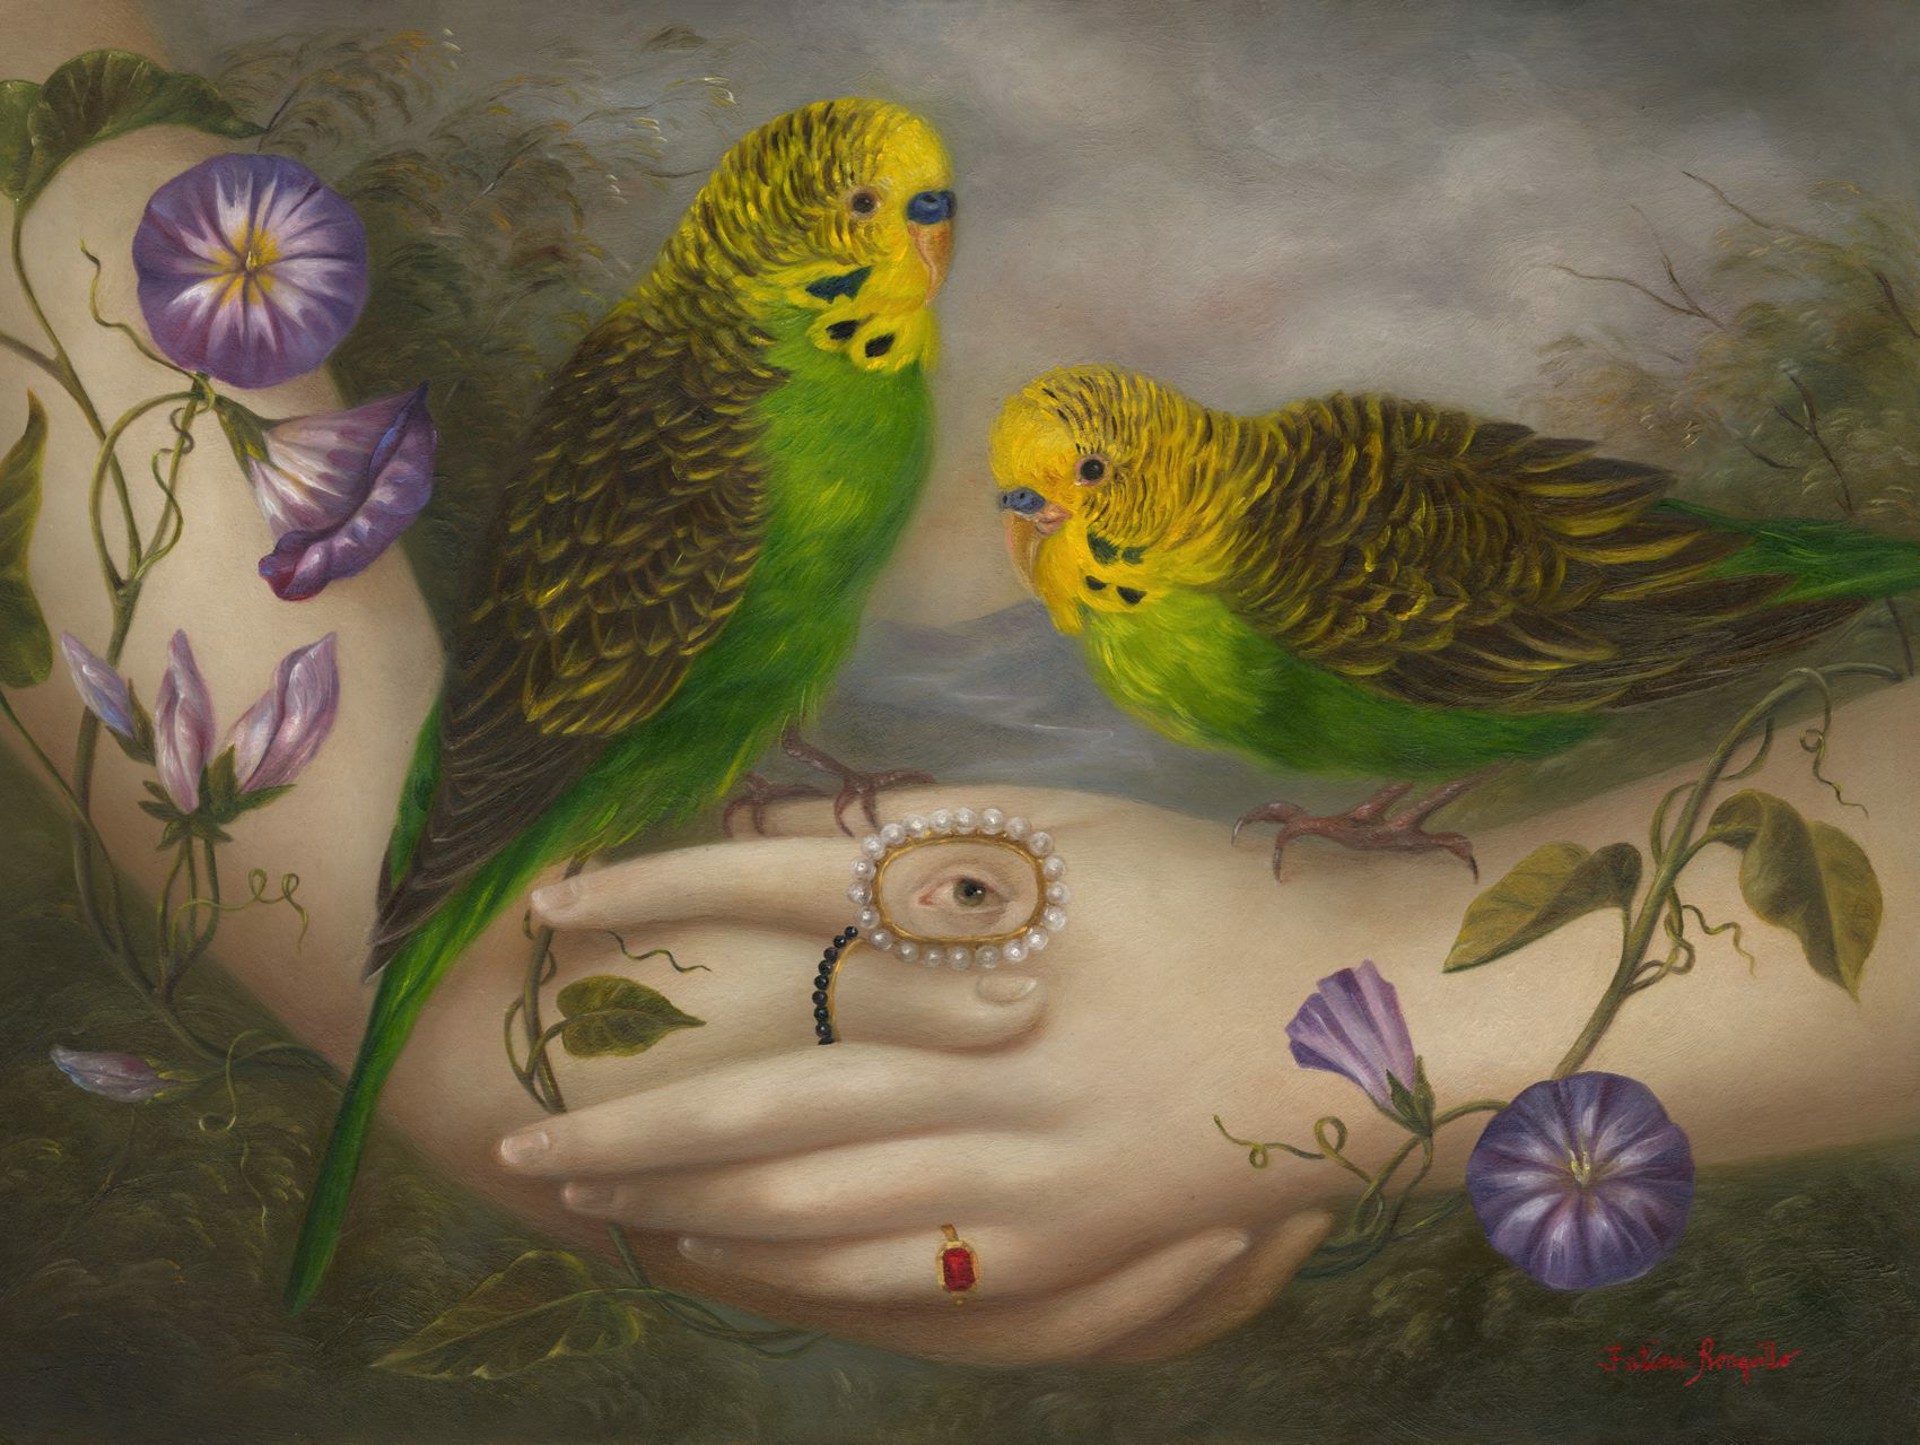 Together by Fatima Ronquillo